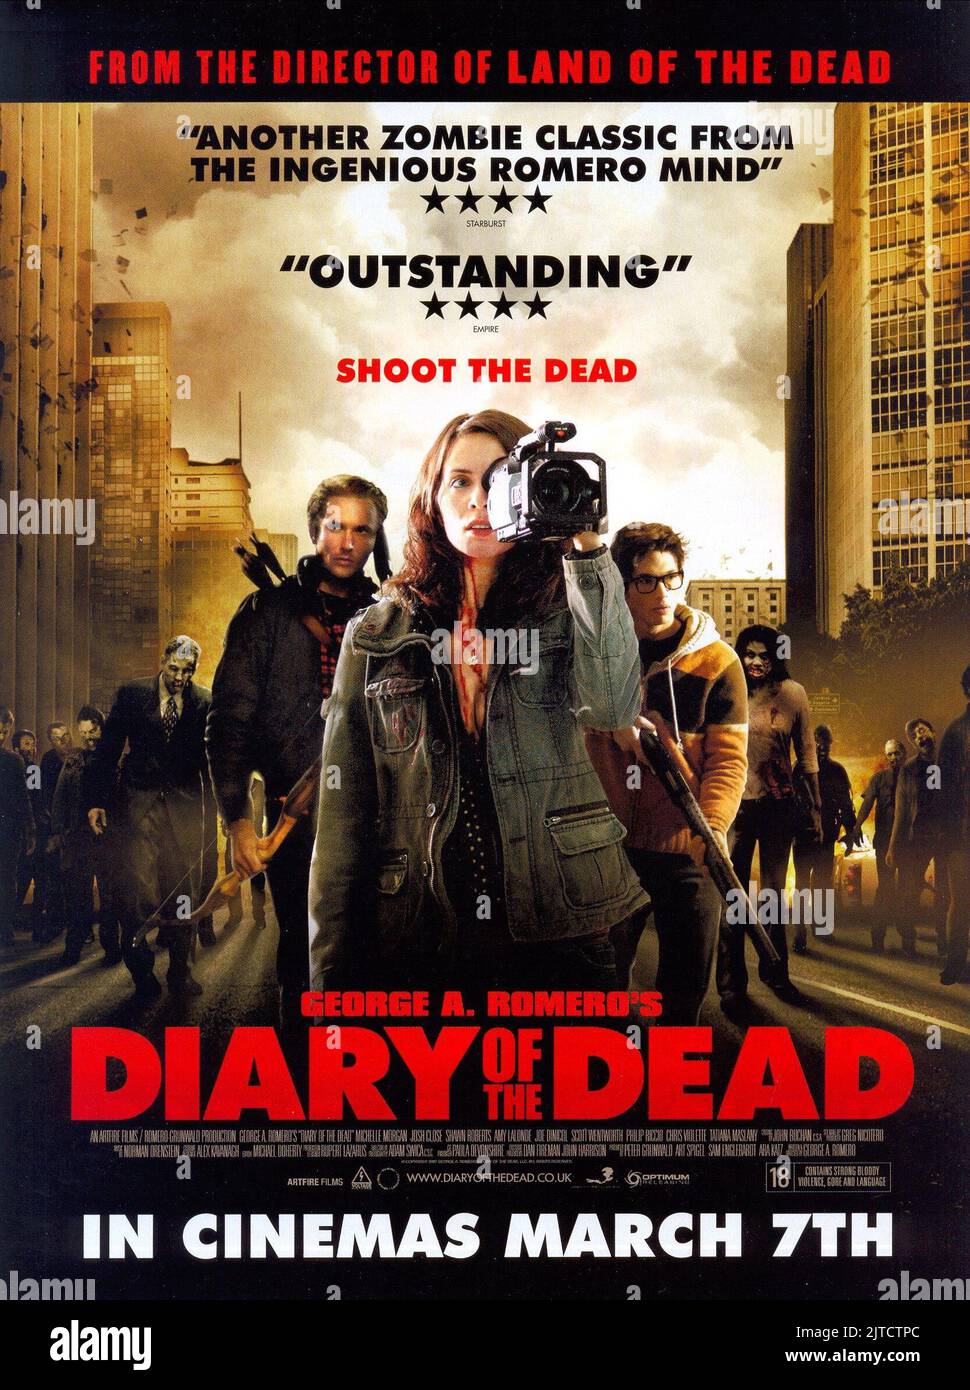 MICHELLE MORGAN POSTER, DIARY OF THE DEAD, 2007 Stock Photo